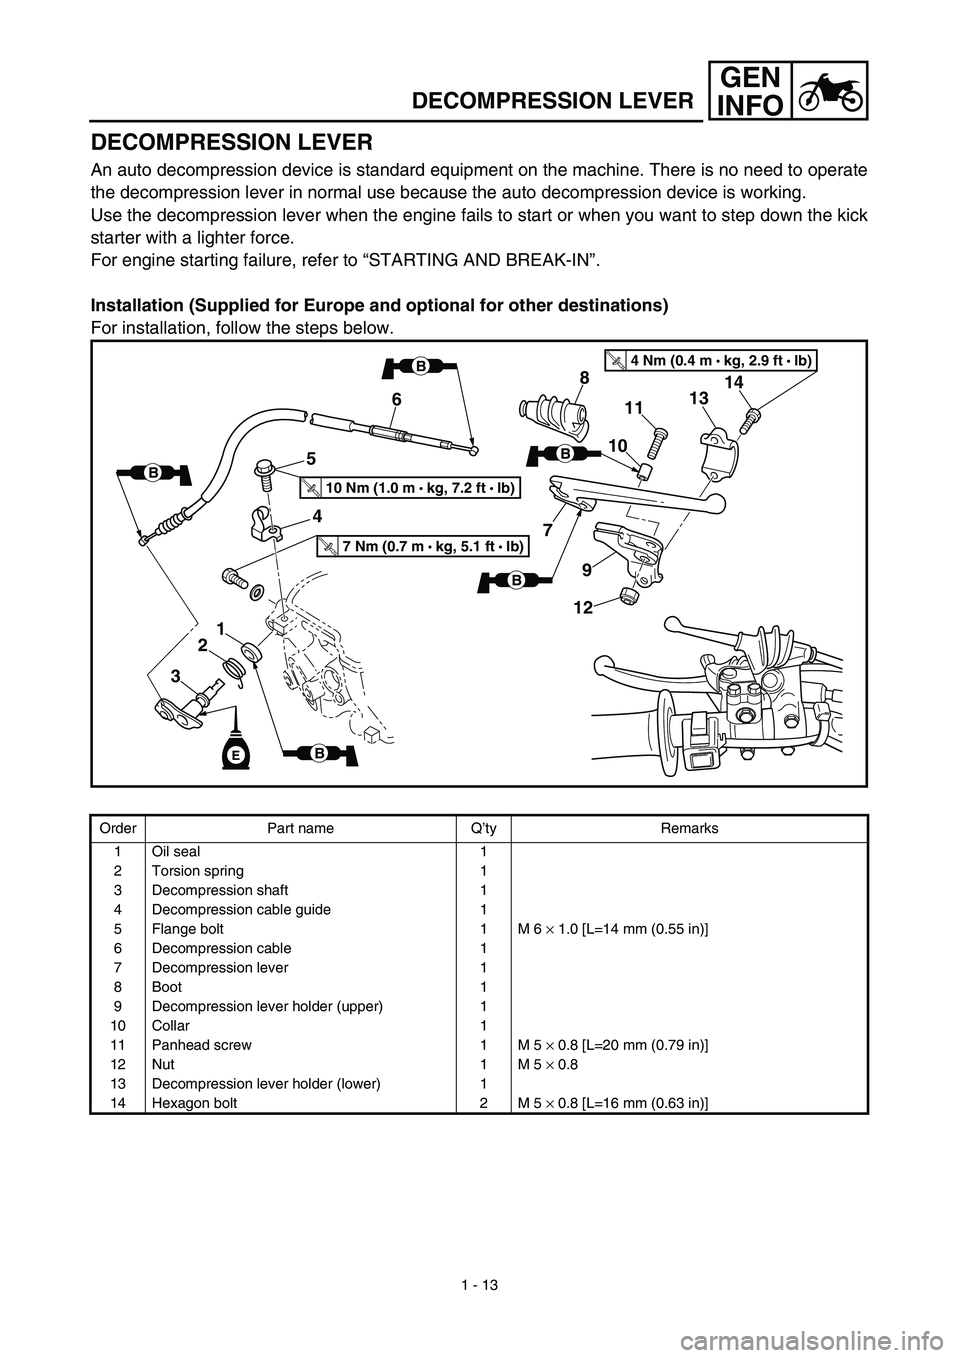 YAMAHA YZ450F 2003  Owners Manual GEN
INFO
1 - 13
DECOMPRESSION LEVER
DECOMPRESSION LEVER
An auto decompression device is standard equipment on the machine. There is no need to operate
the decompression lever in normal use because the